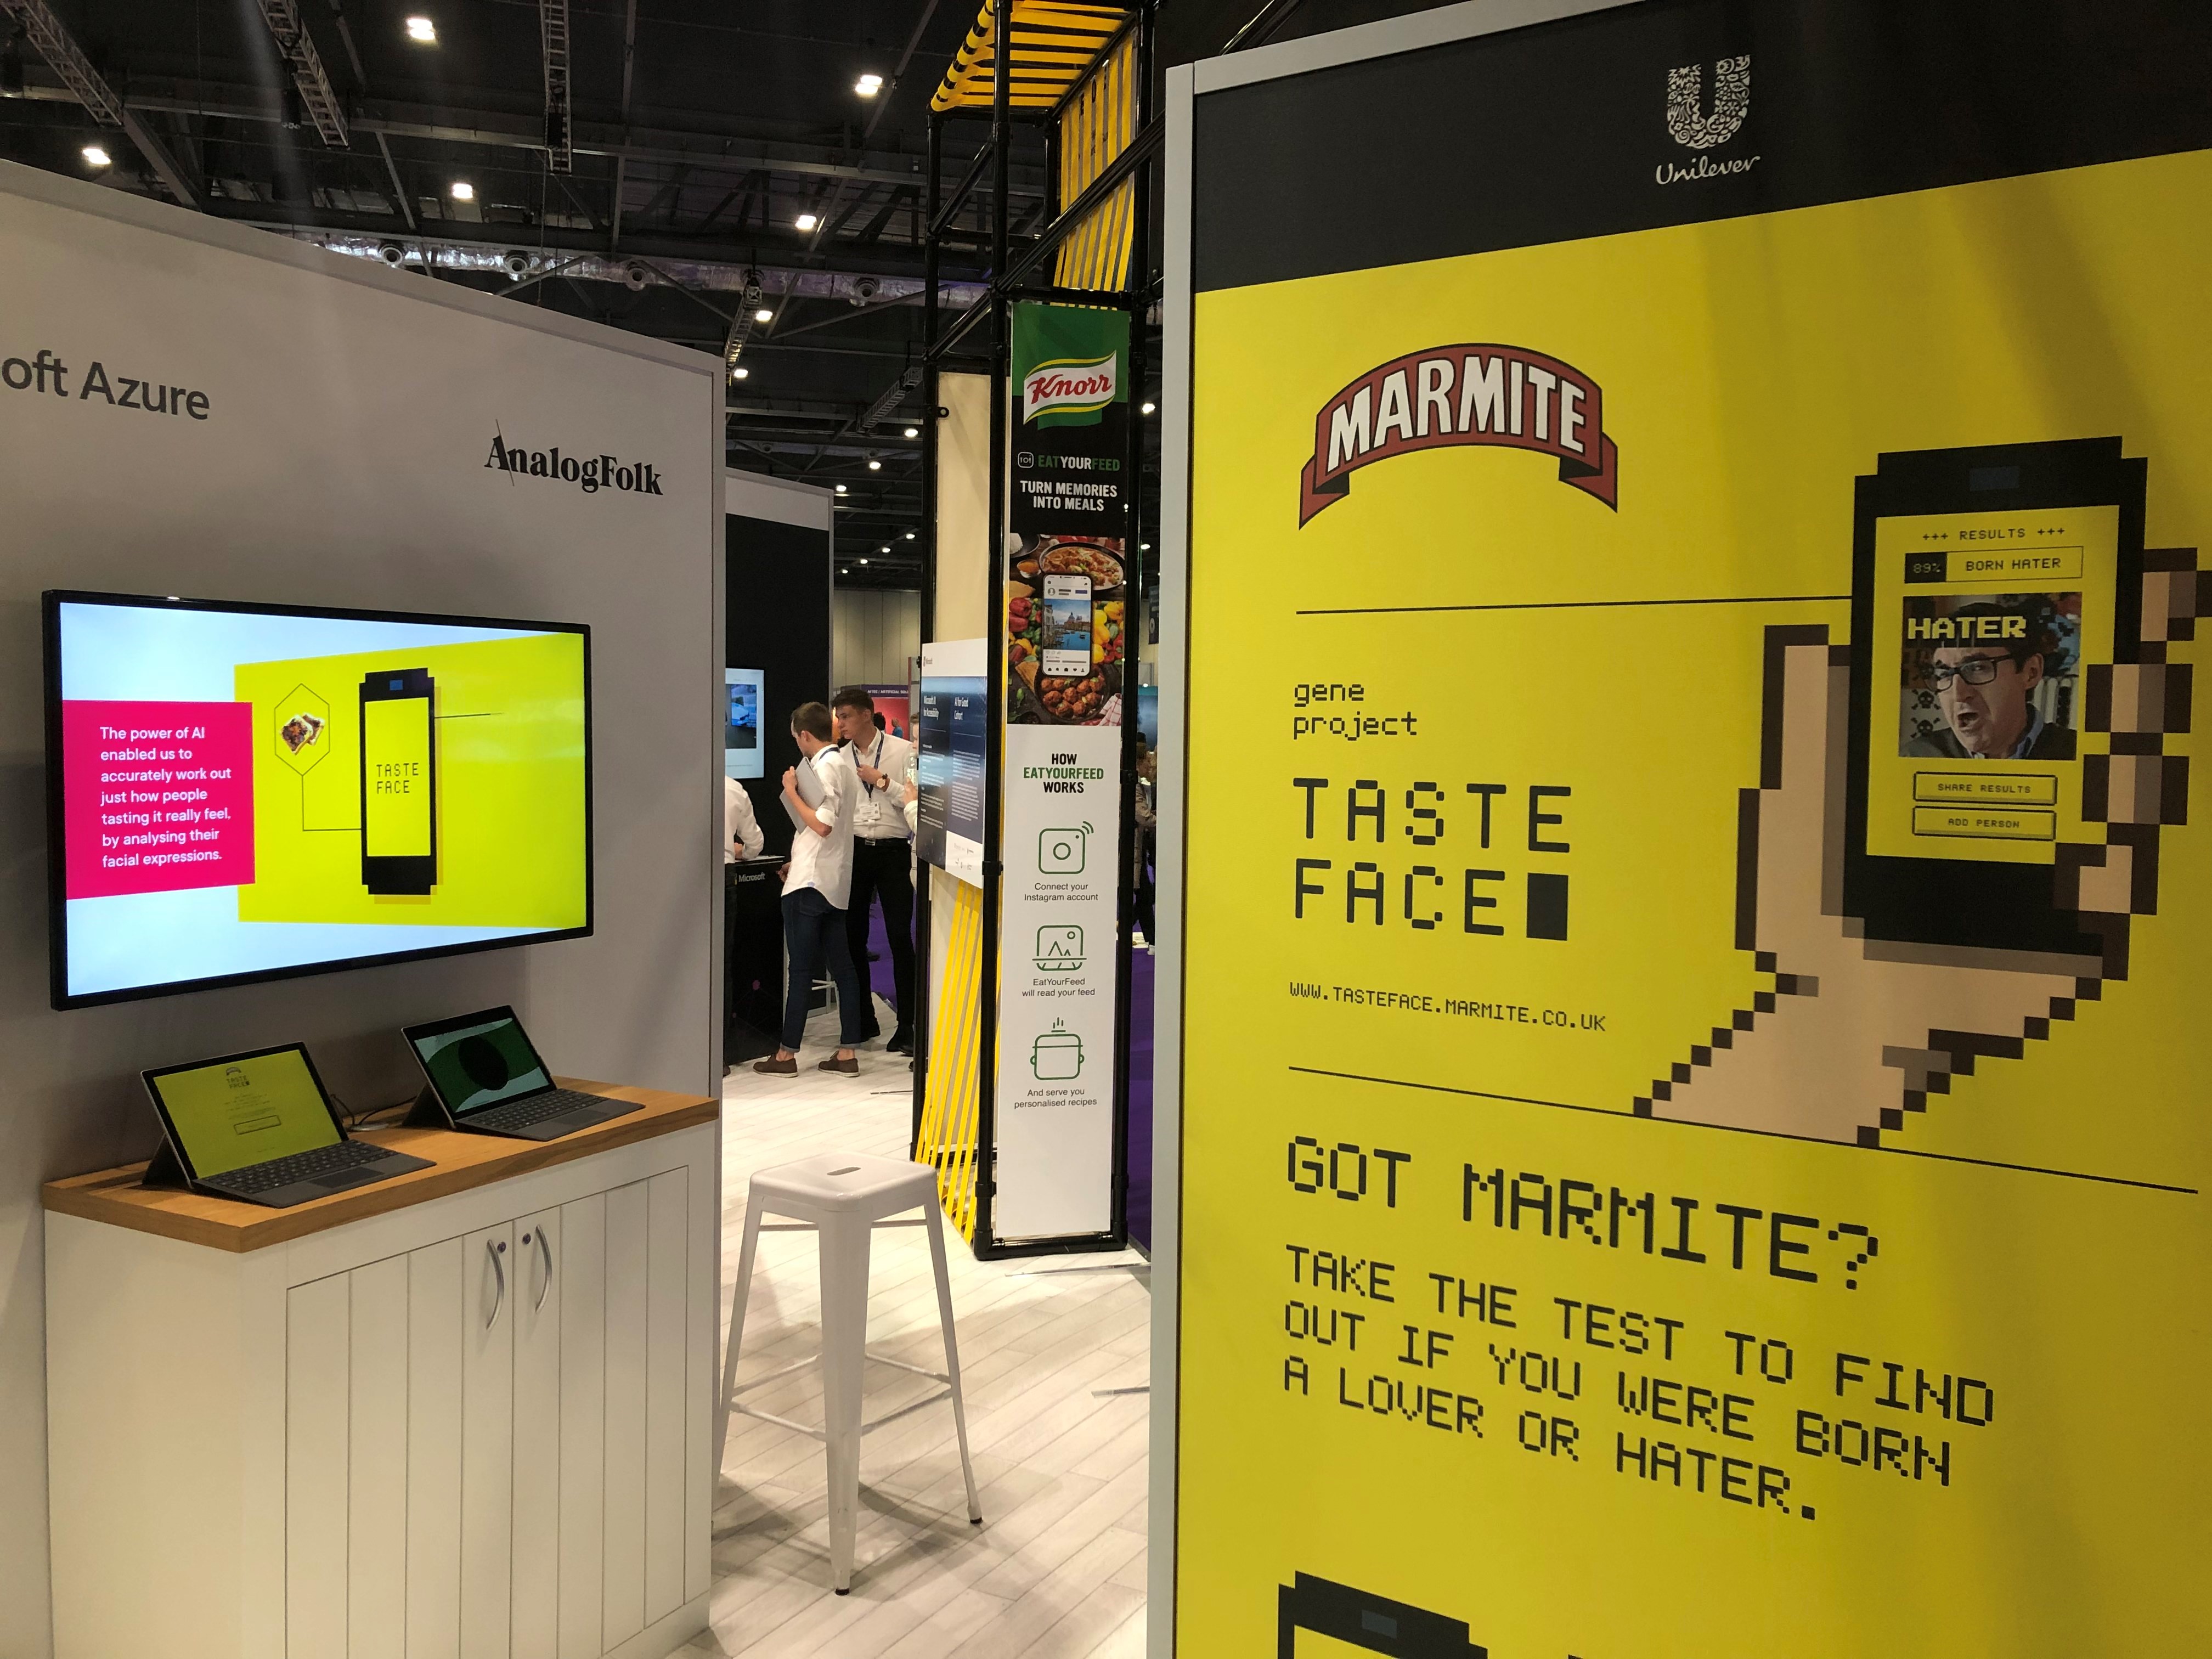 AI could tell whether people liked or loathed Marmite